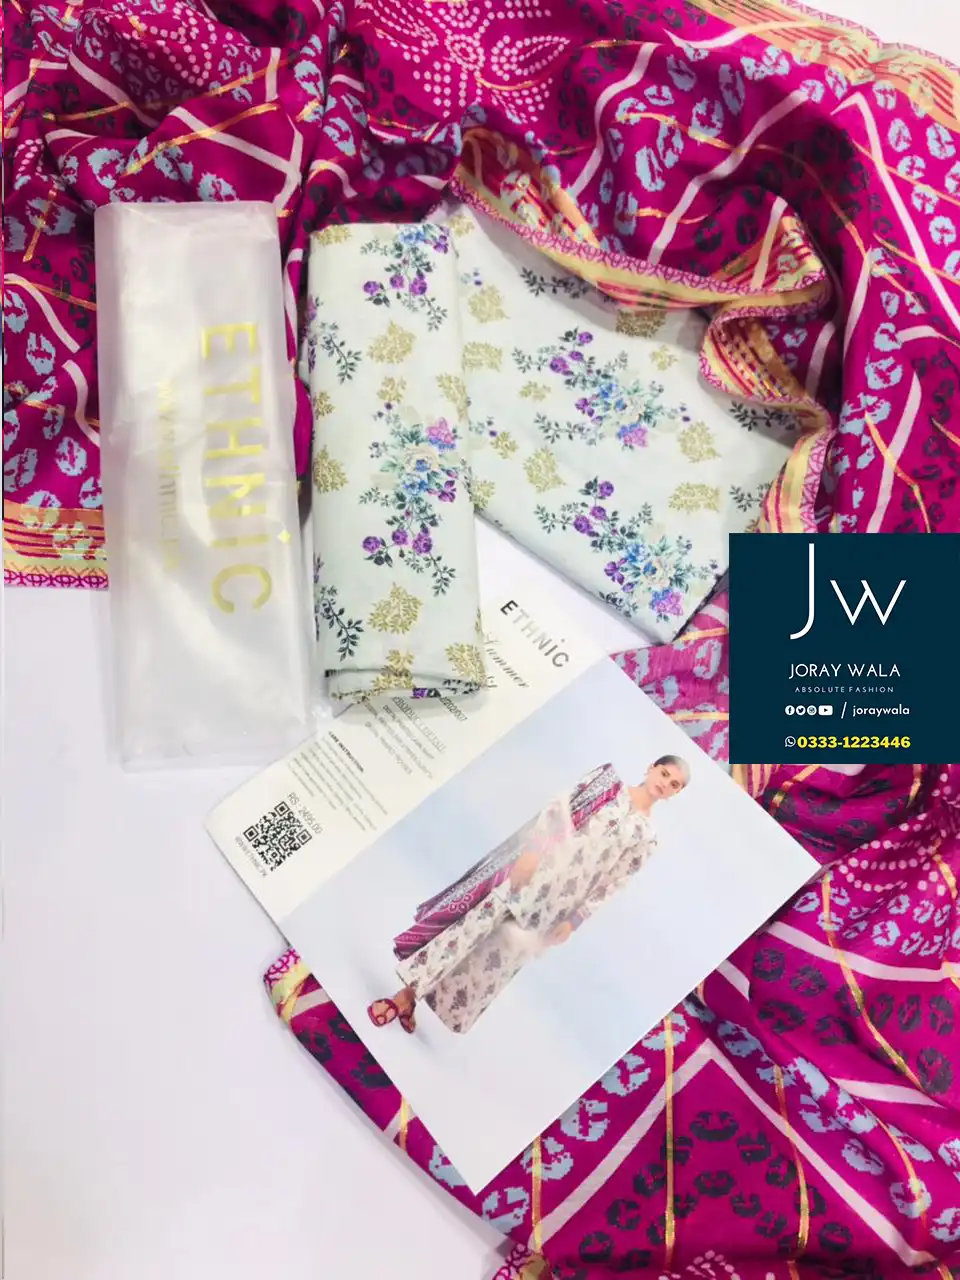 Lawn 3 pcs suit with golden zari dupatta, fine quality fabric available at joraywala